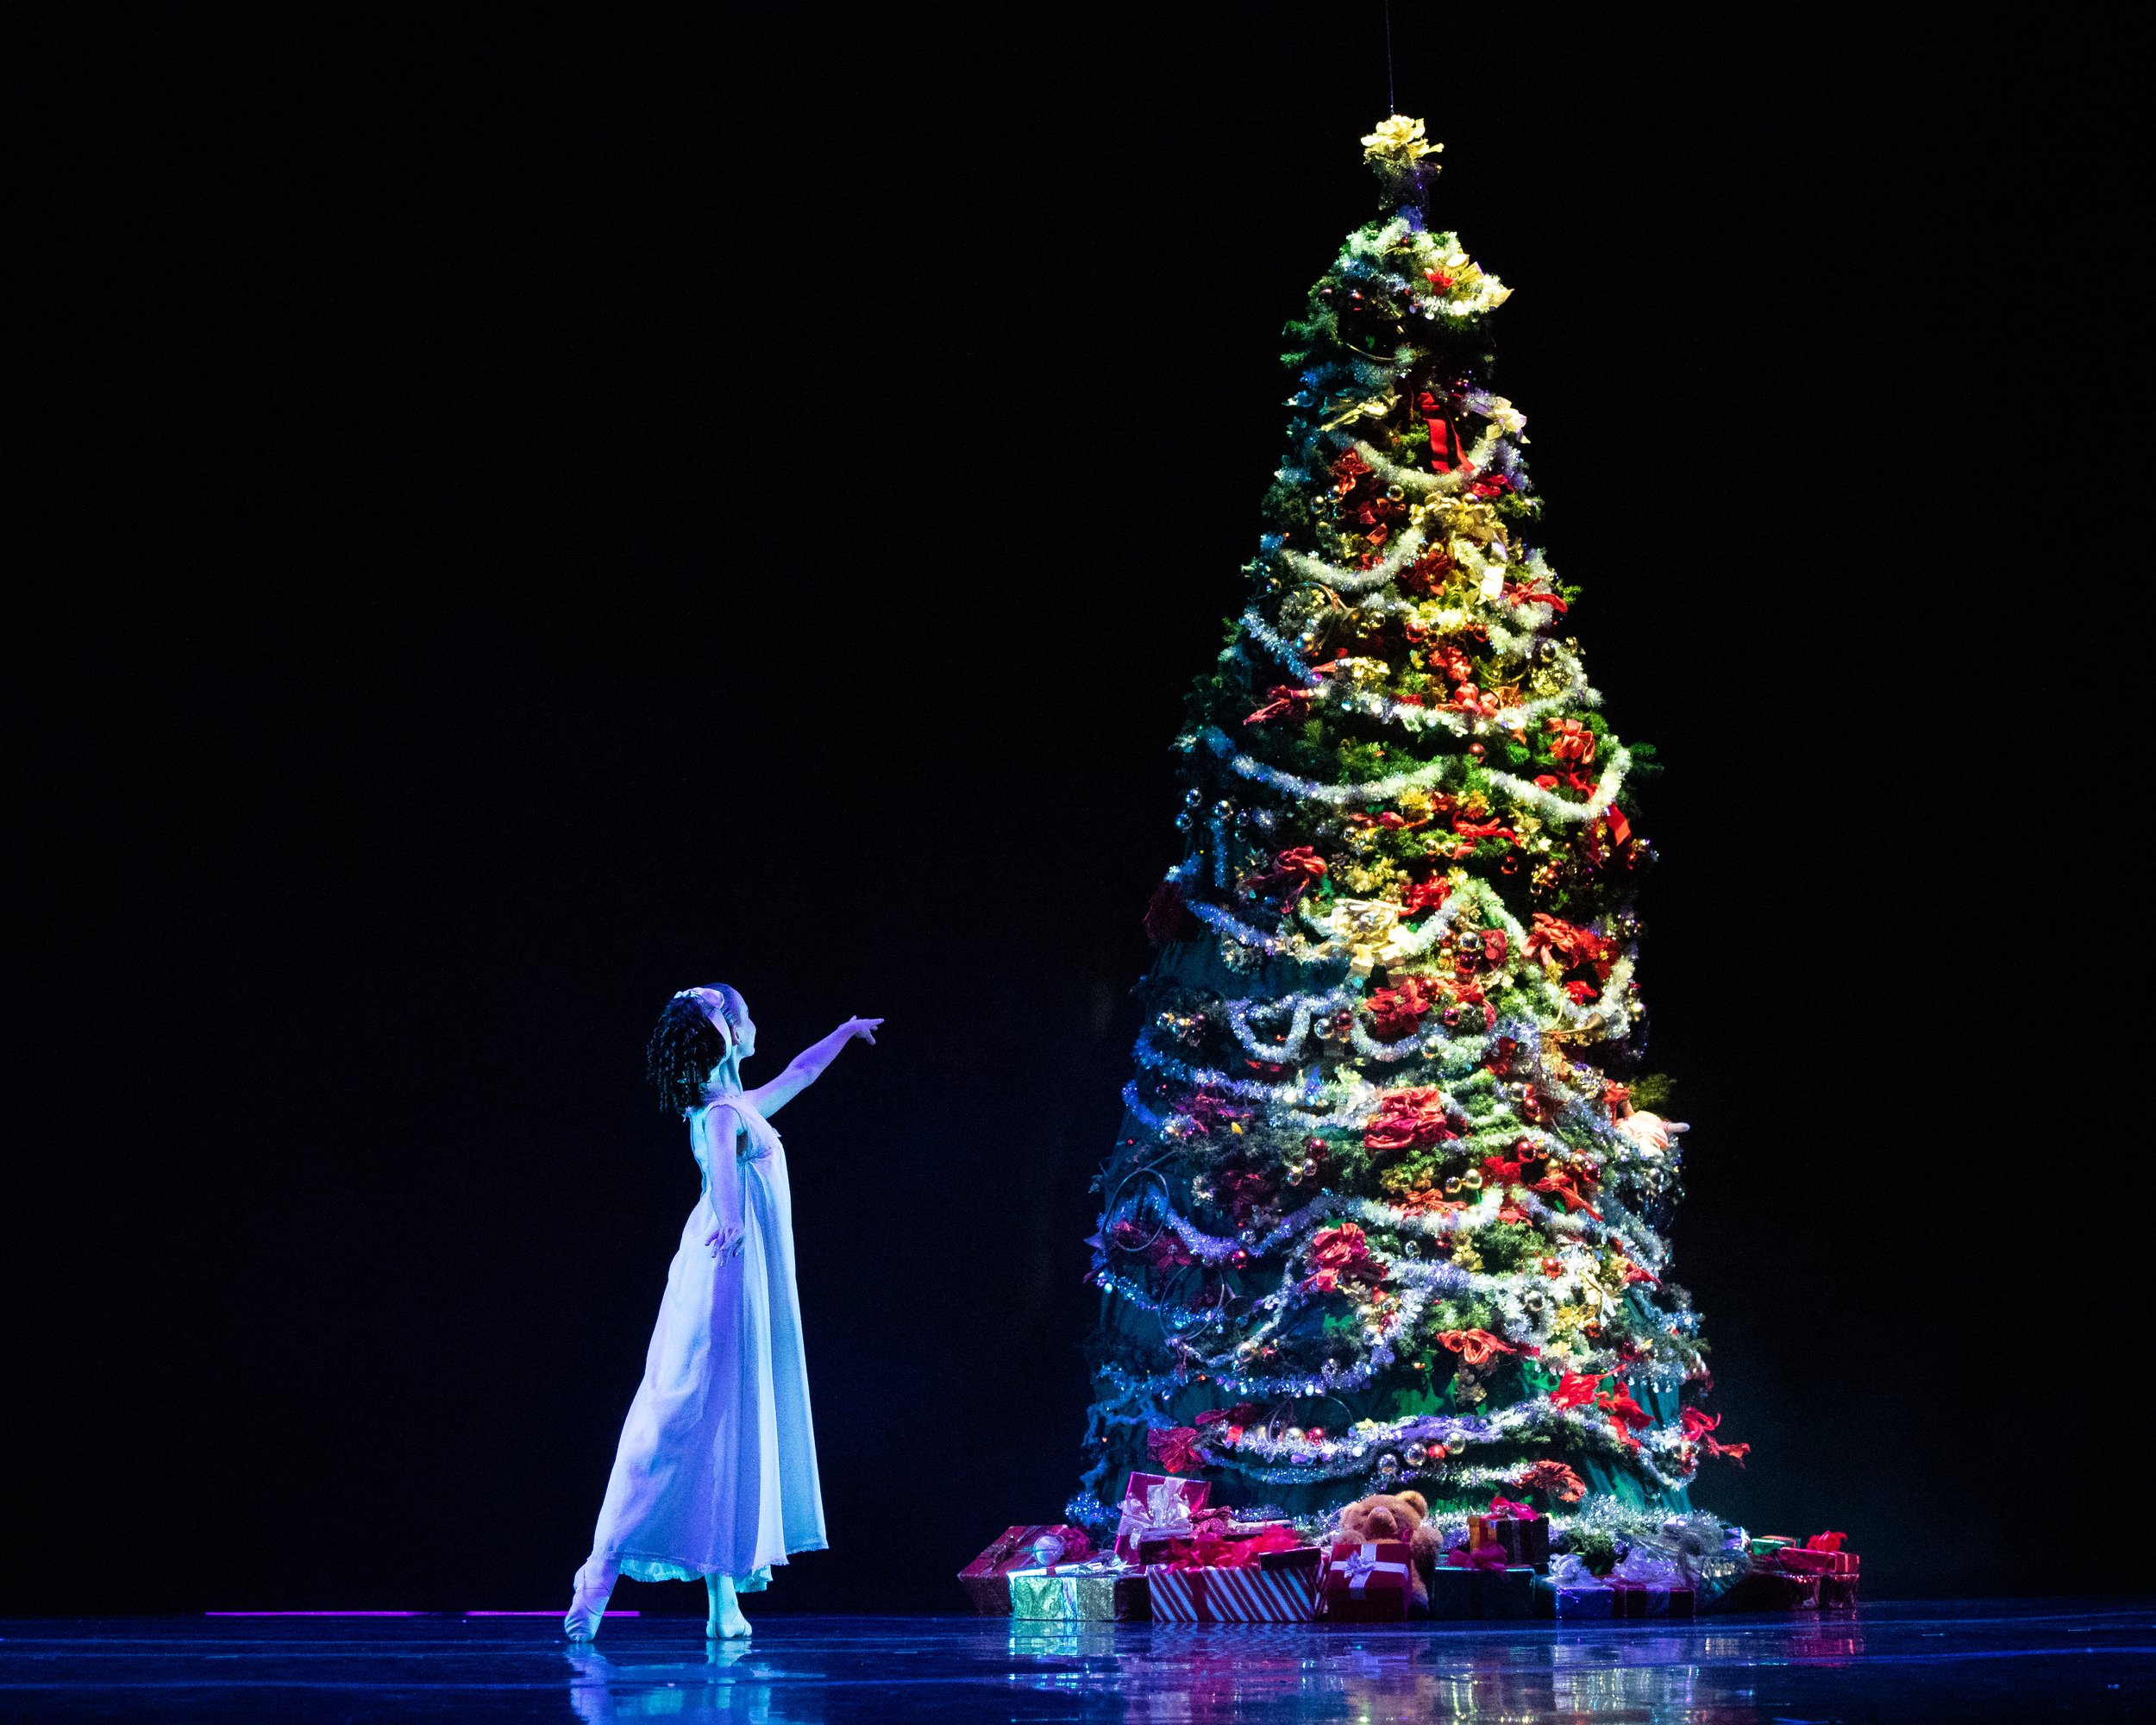  Clara, played by Sophie Wilson, shrinking as the toys begin to come to life in Act 1, Scene 2 of The Nutcracker performed by Westside Ballet of Santa Monica at the The Broad Stage in Santa Monica, Calif. on Sunday, Dec. 4, 2022. (Caylo Seals | The C